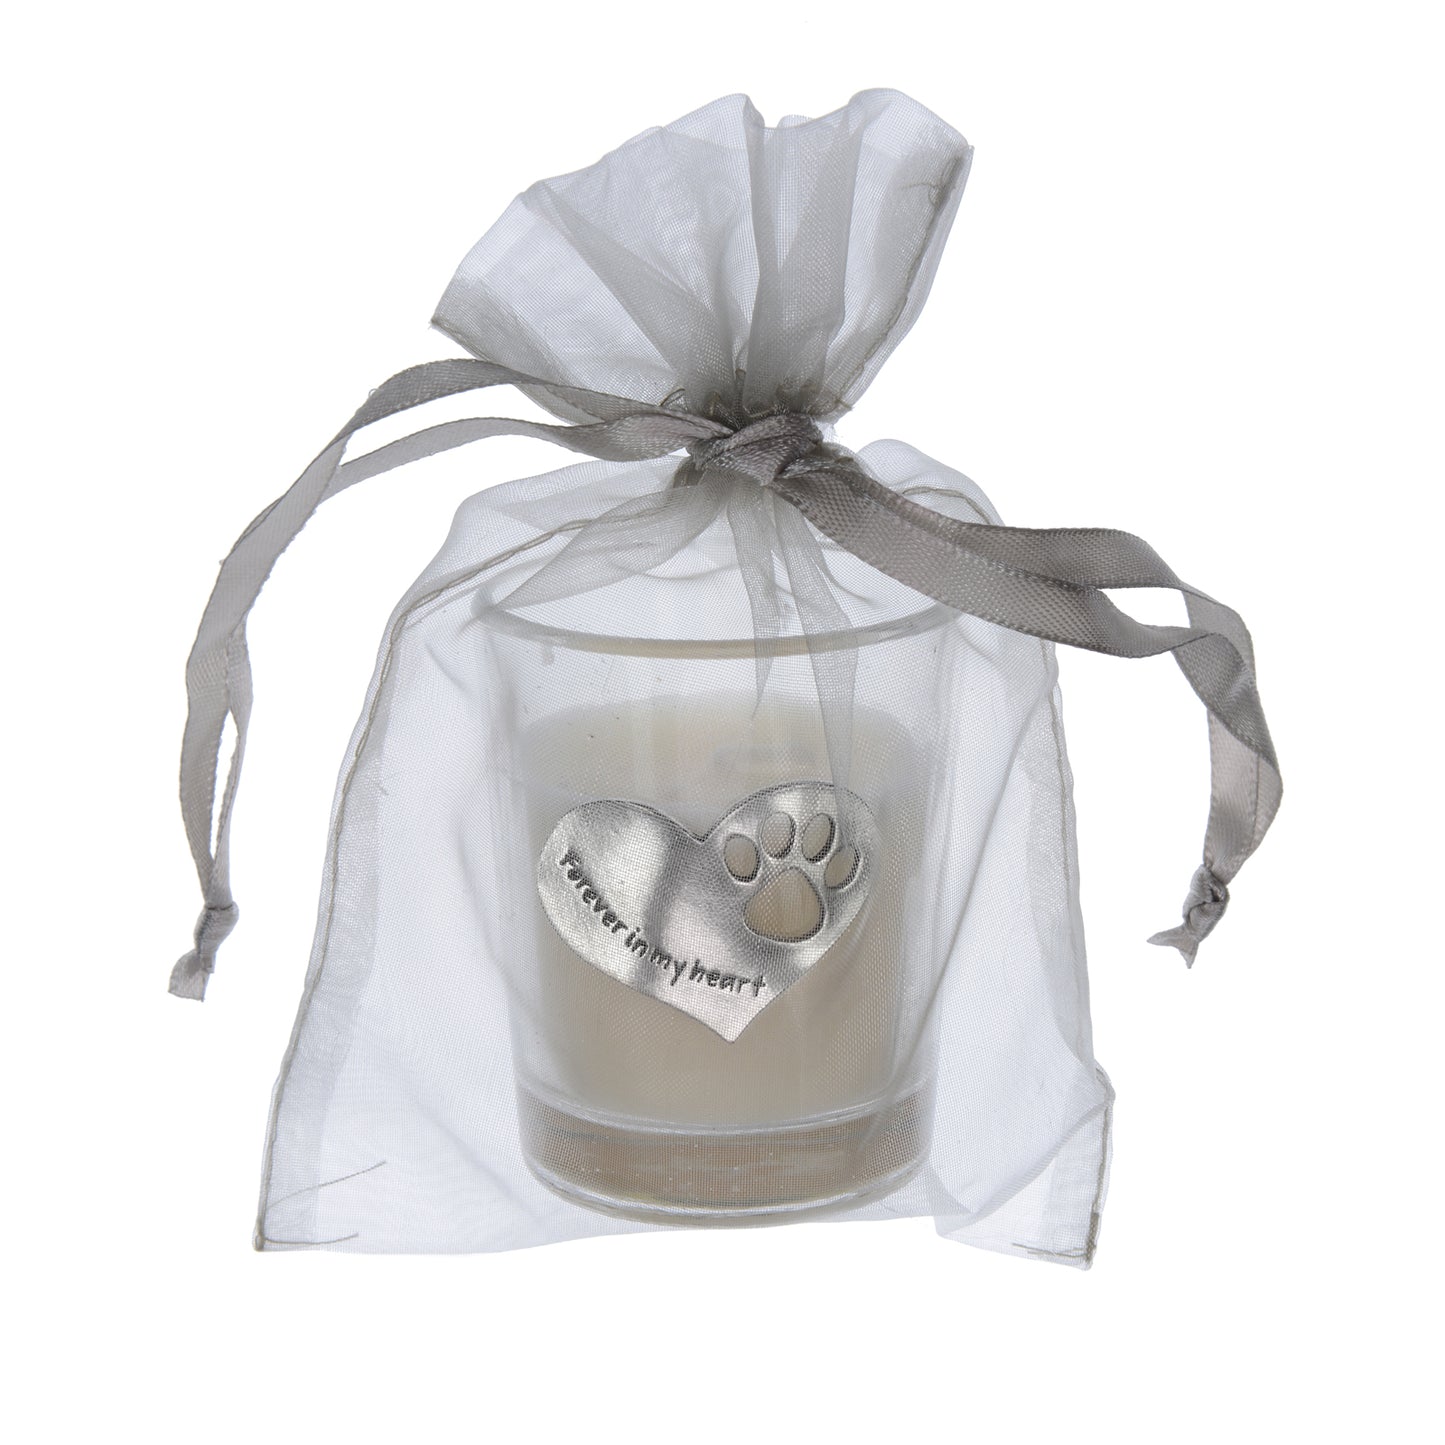 Forever in My Heart - Pet Memorial Candle